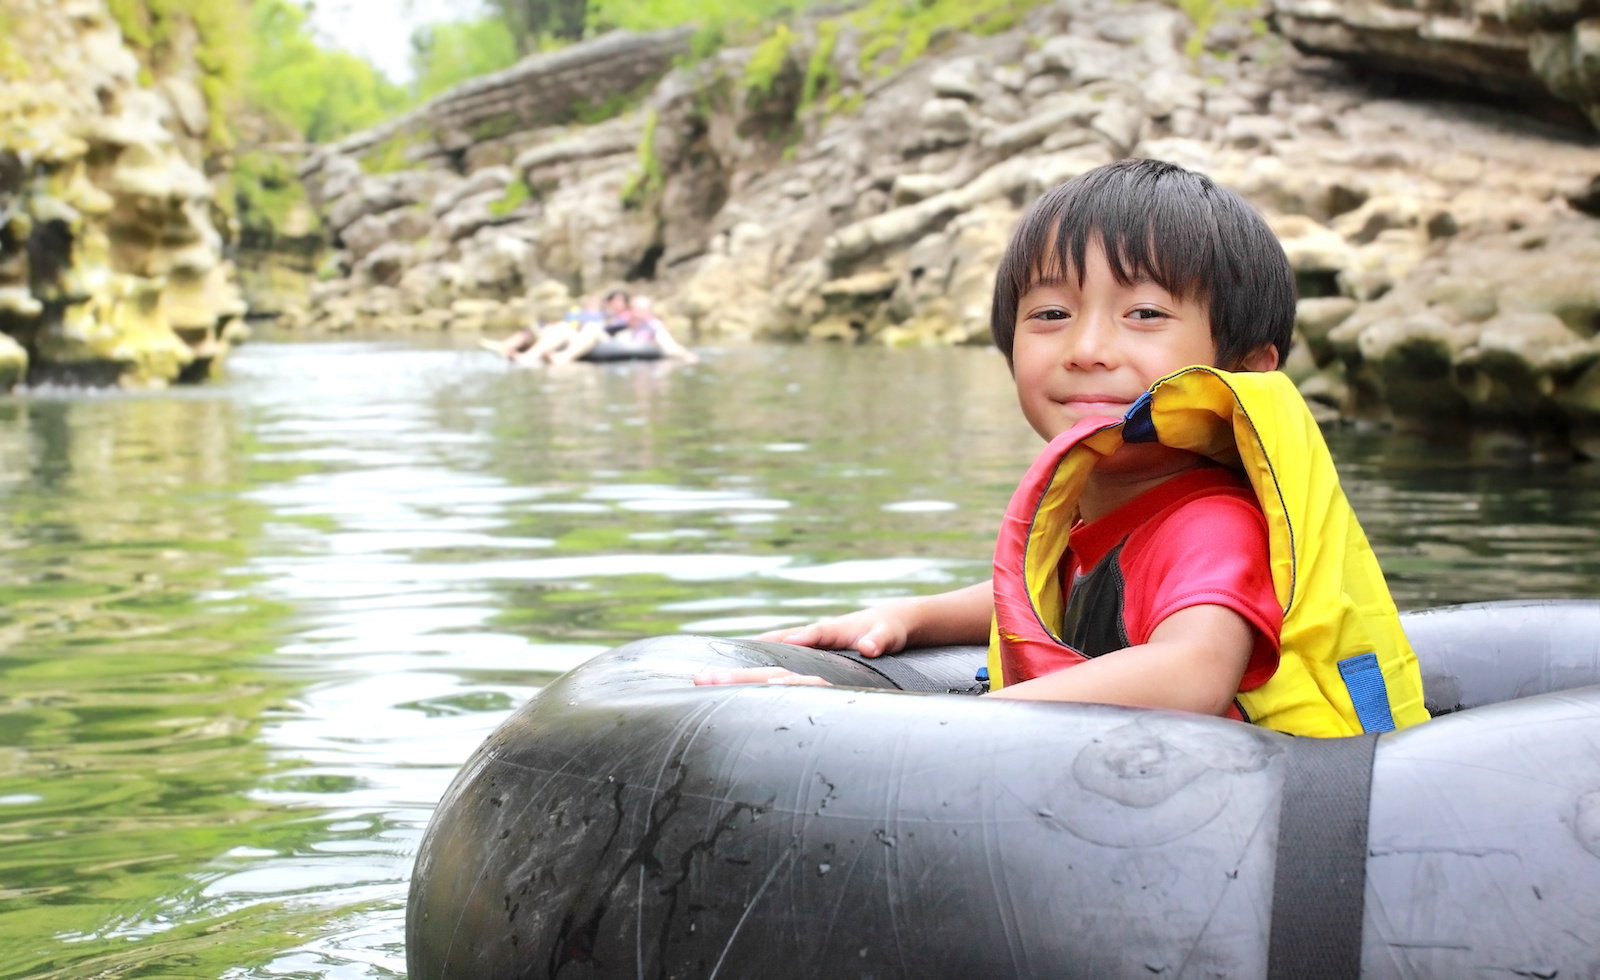 River tubing with child smiling